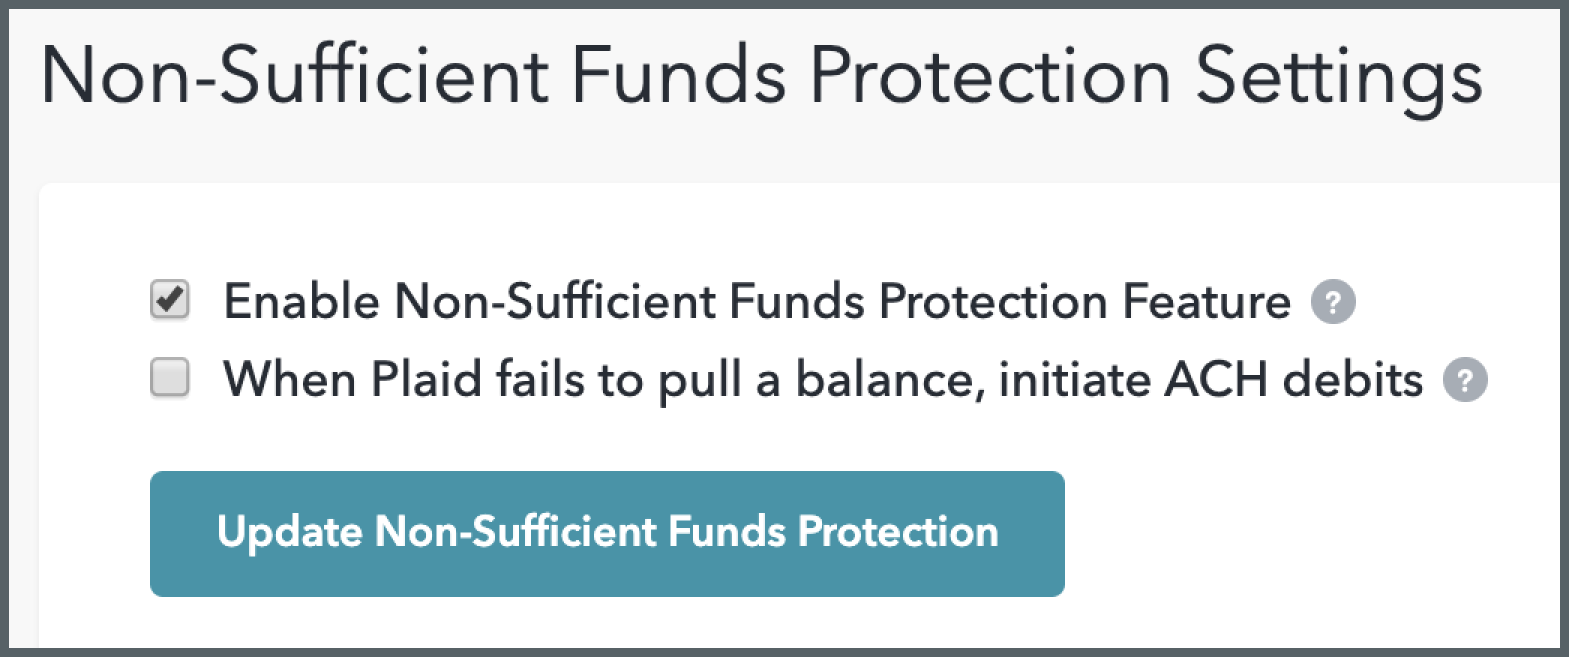 Non-Sufficient Funds Protection Settings